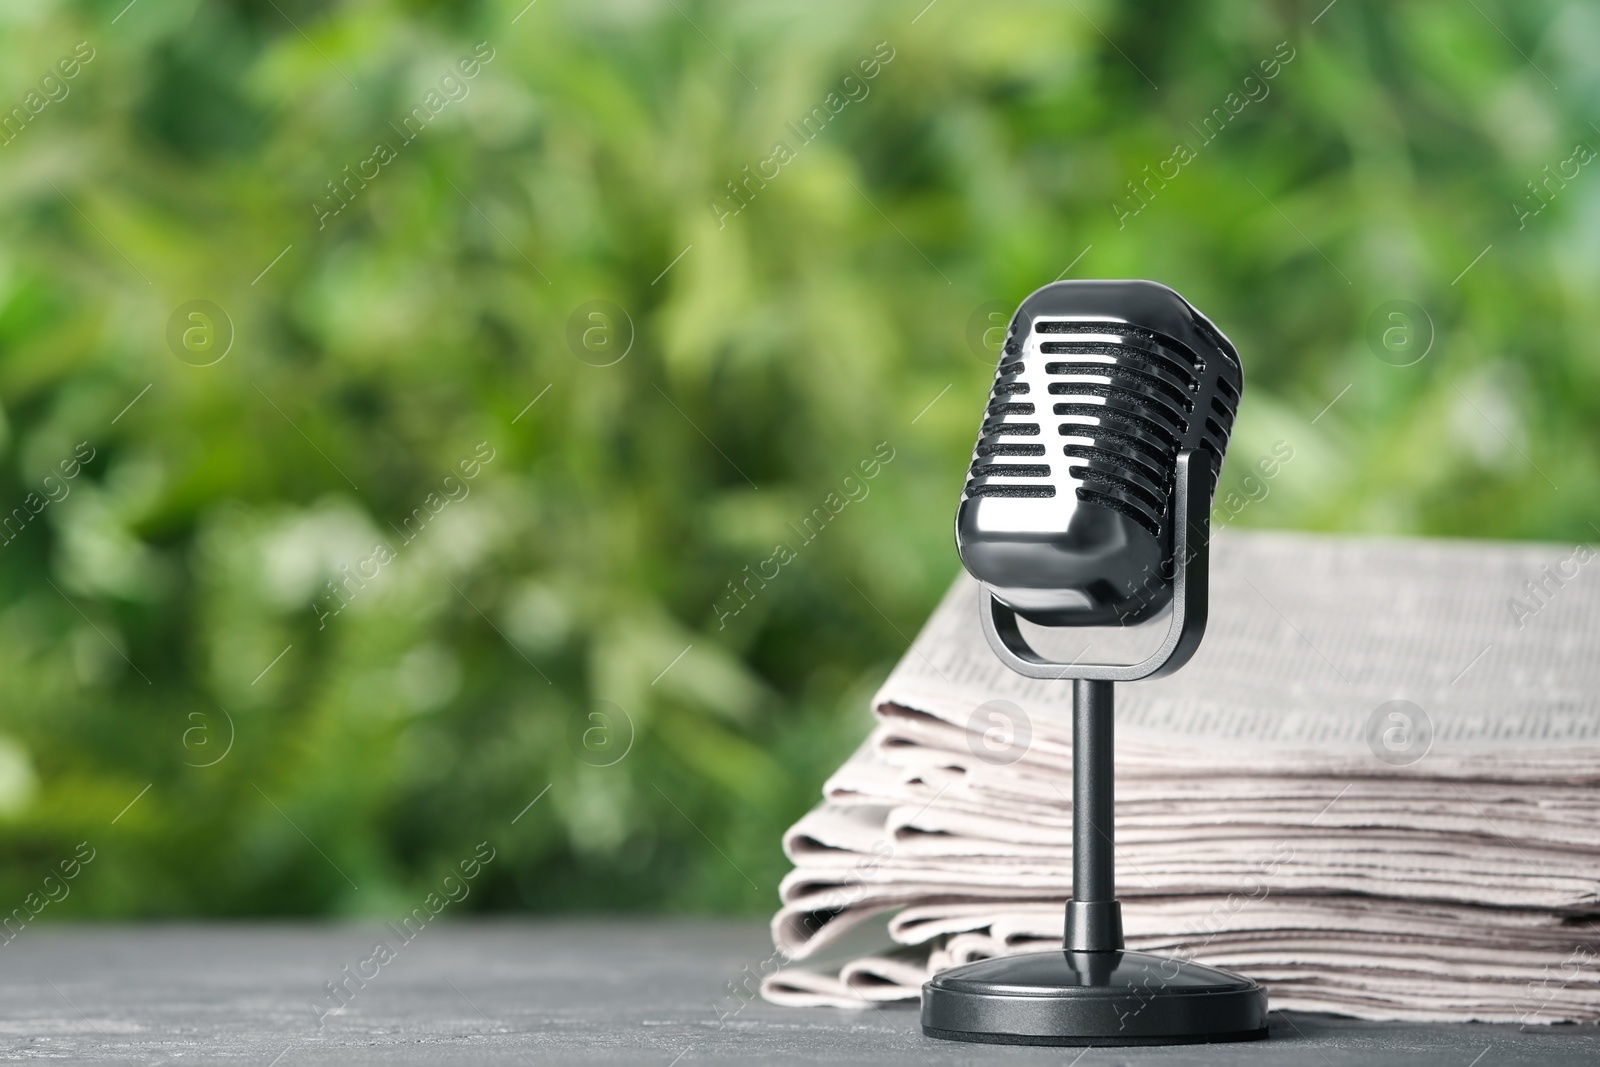 Photo of Newspapers and vintage microphone on grey table against blurred green background, space for text. Journalist's work